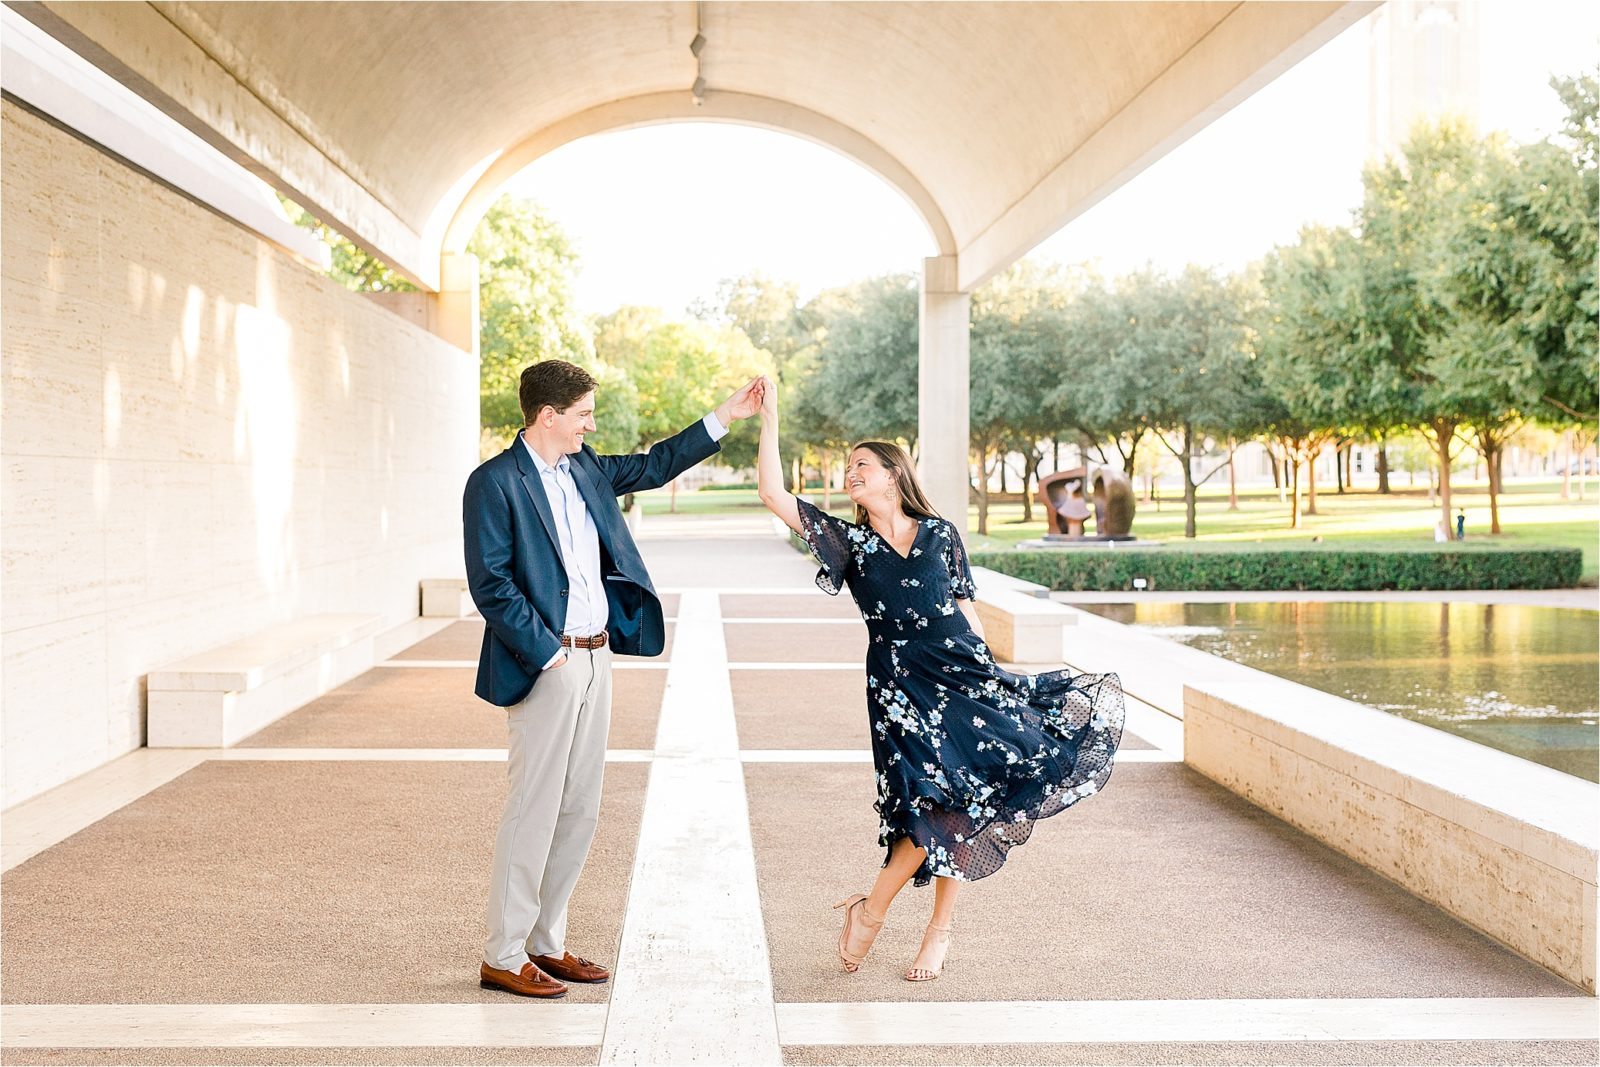 A couple dancing under the arches during their engagement session at The Kimball Art Museum in Fort Worth, Texas